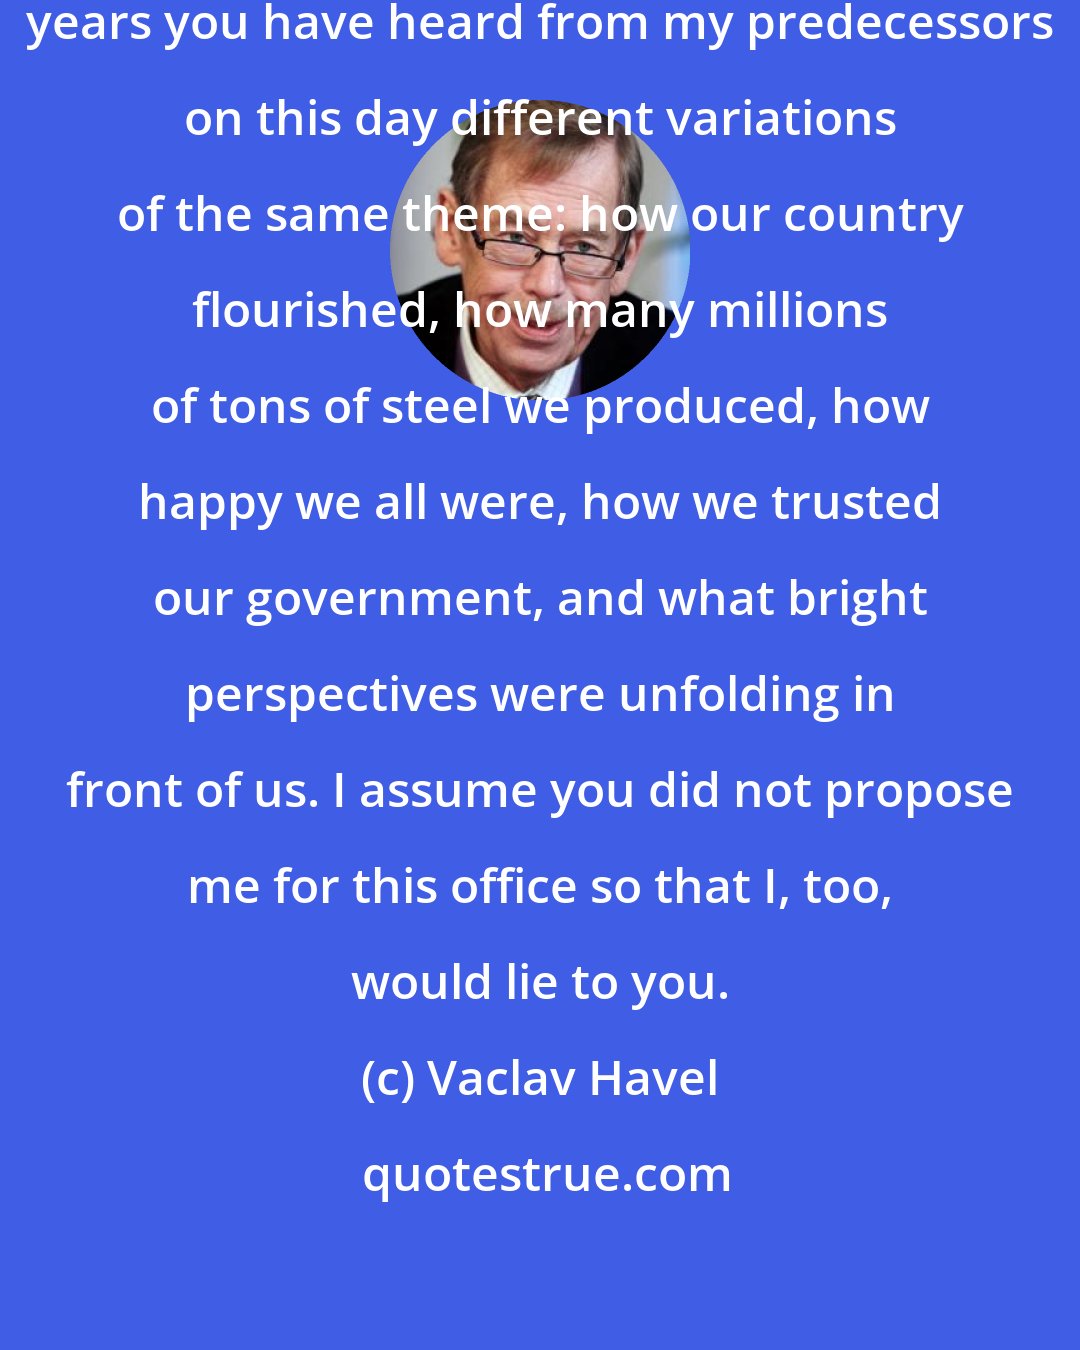 Vaclav Havel: My dear fellow citizens: For forty years you have heard from my predecessors on this day different variations of the same theme: how our country flourished, how many millions of tons of steel we produced, how happy we all were, how we trusted our government, and what bright perspectives were unfolding in front of us. I assume you did not propose me for this office so that I, too, would lie to you.